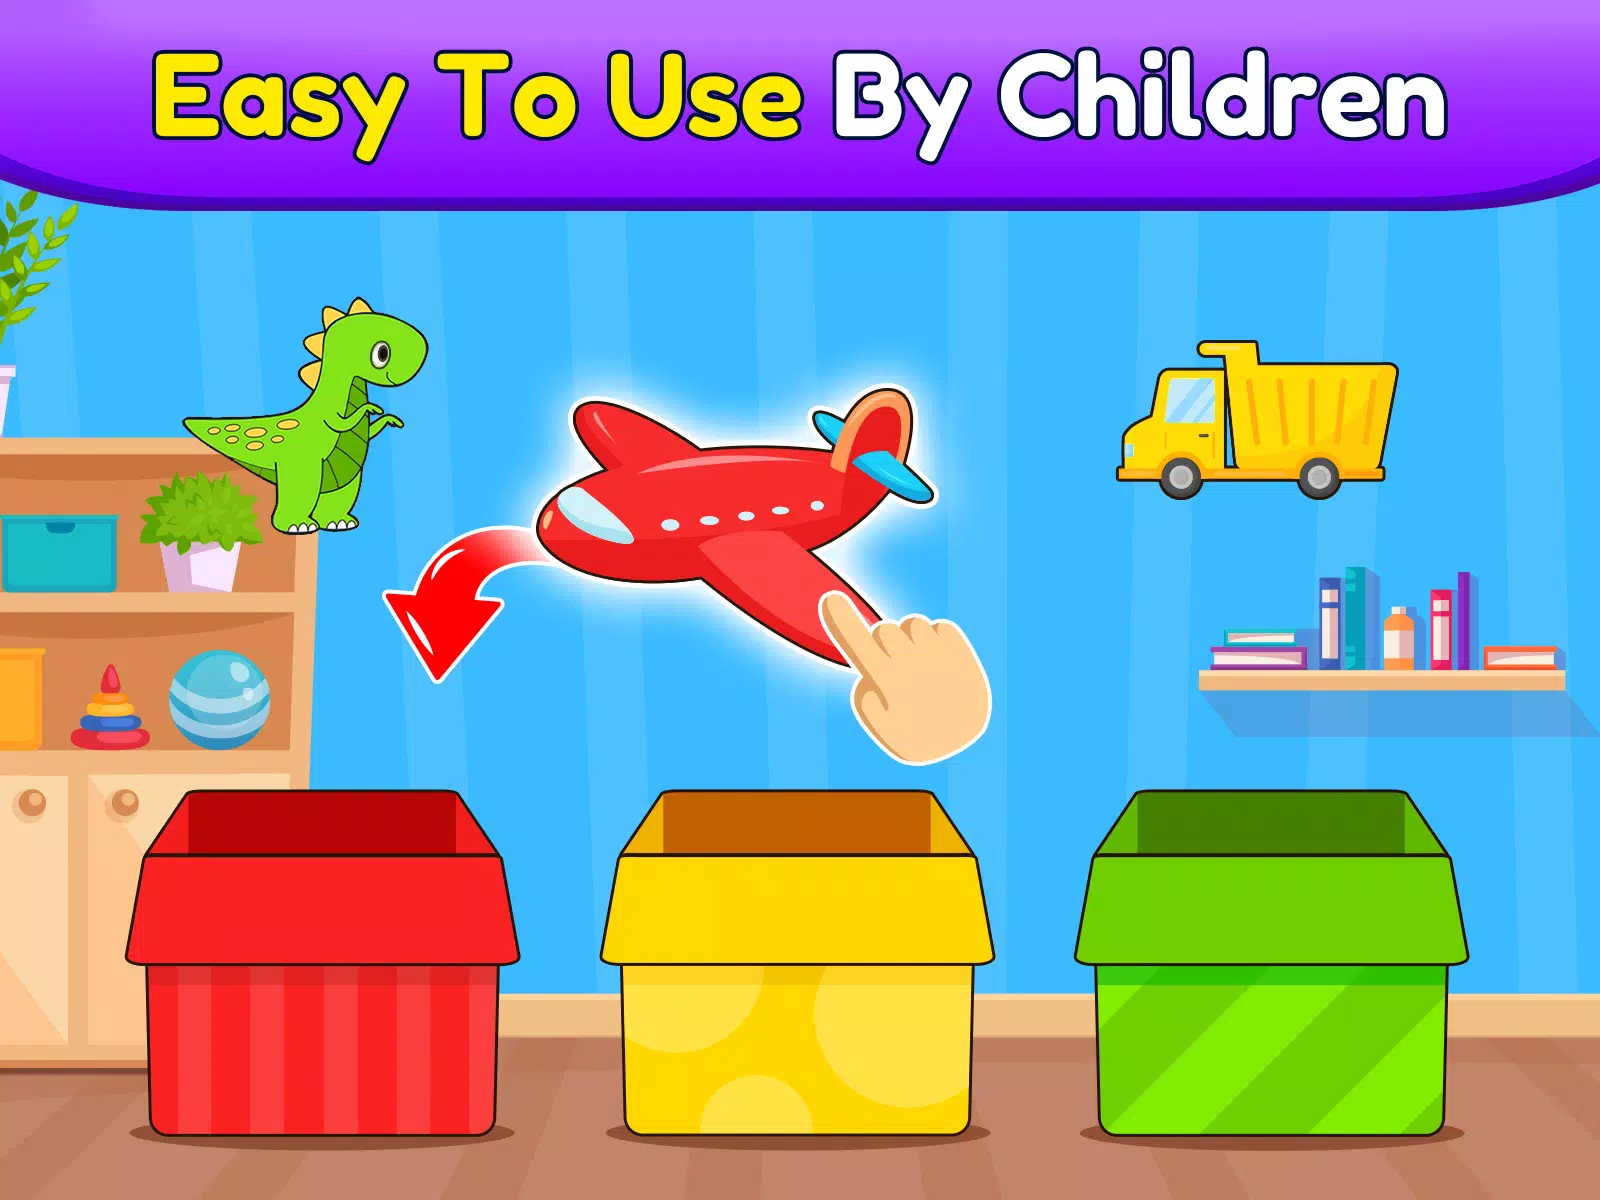 Download Baby Games: 2-4 year old Kids APK for Android, Play on PC and Mac